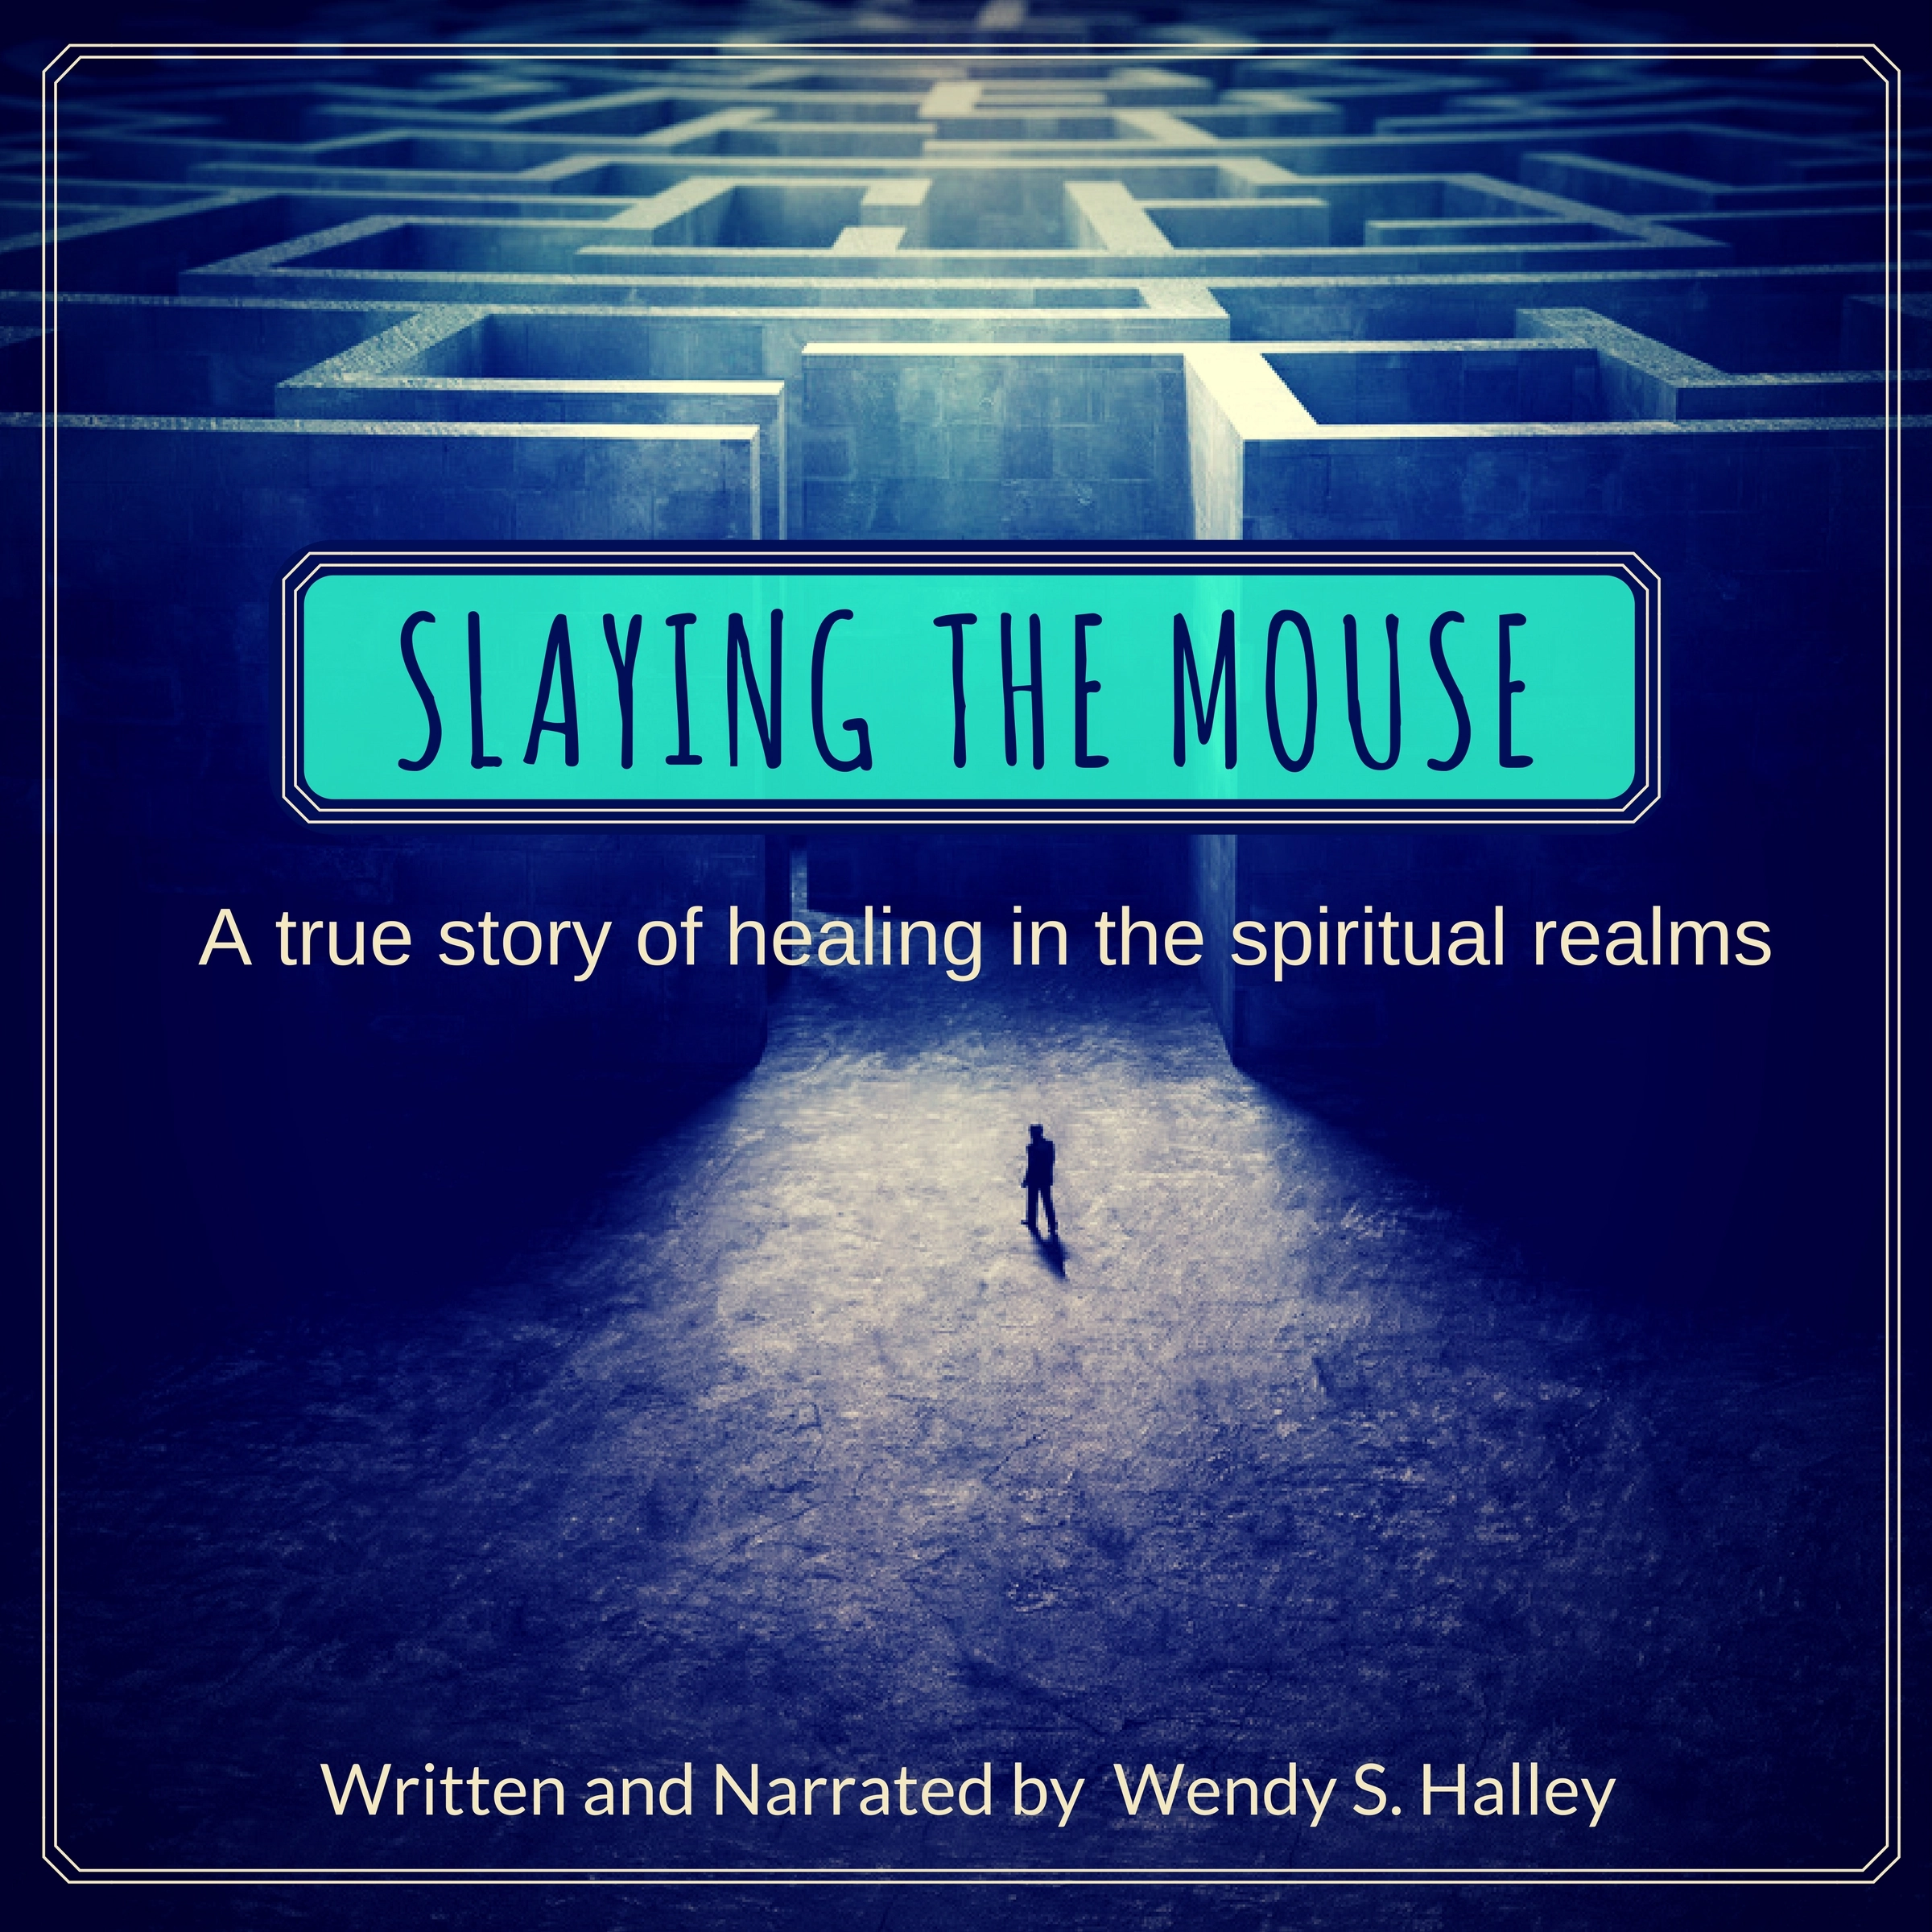 Slaying the Mouse Audiobook by Wendy Halley